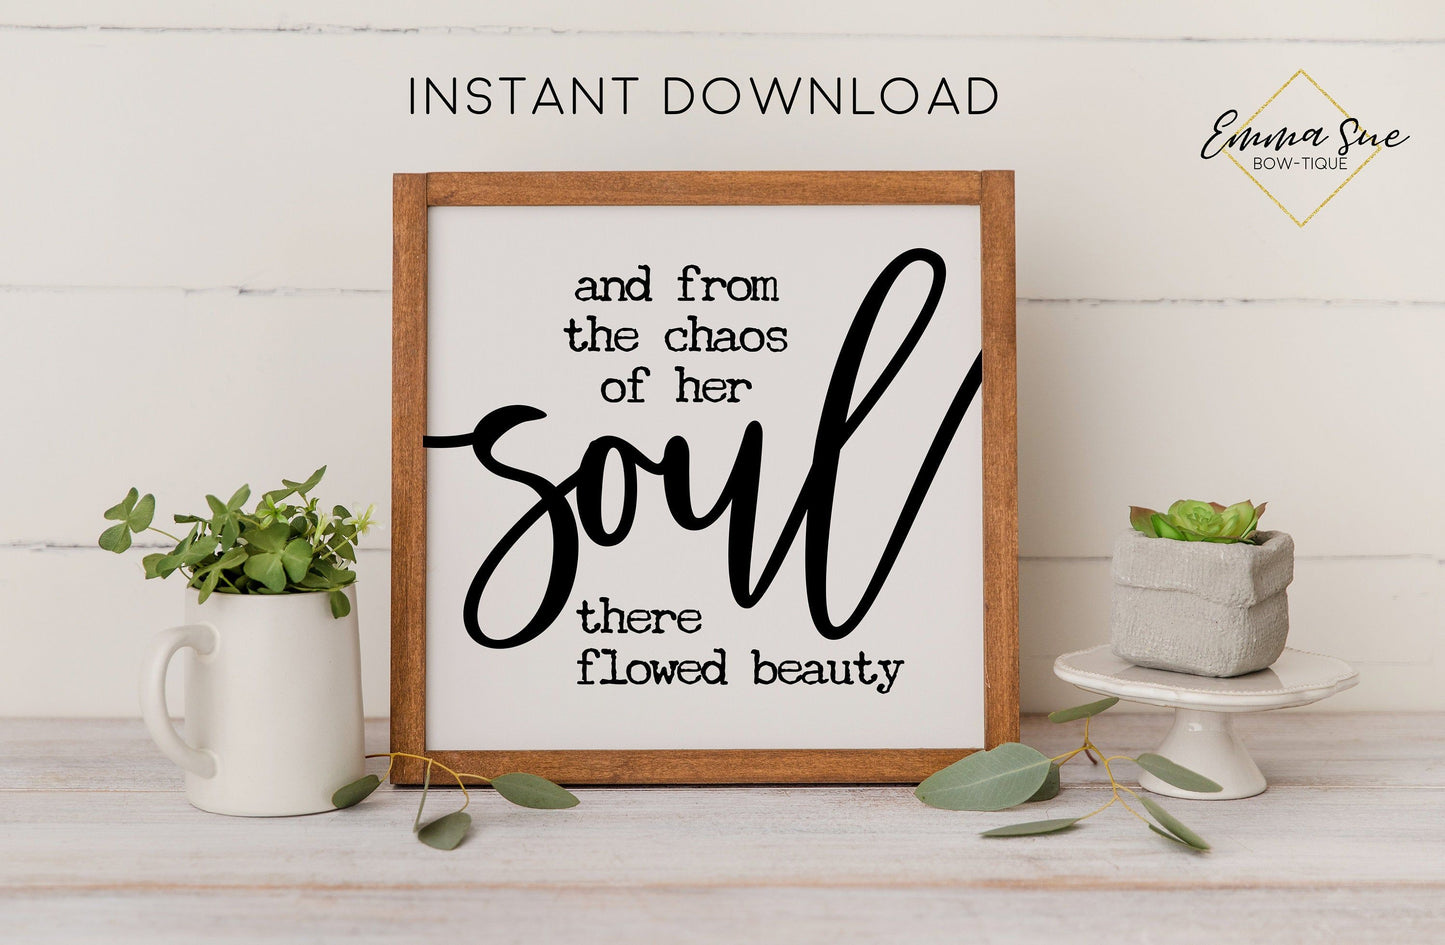 And from the chaos of her soul there flowed beauty - Confidence Self love Motivational Quotes Printable Sign